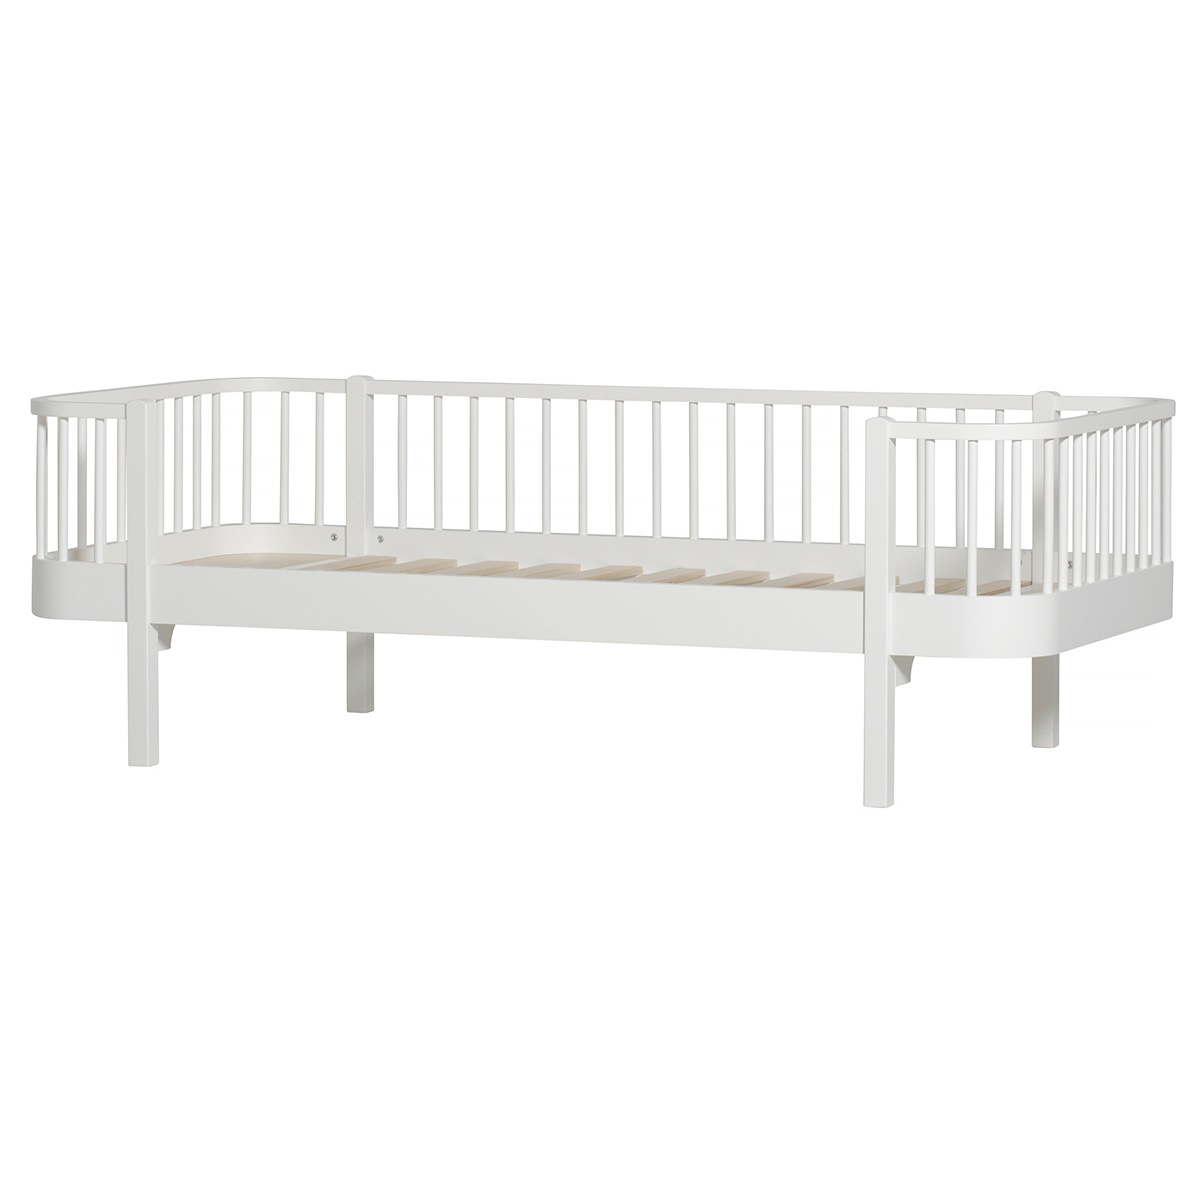 Wood Day Bed, 90x200cm, White